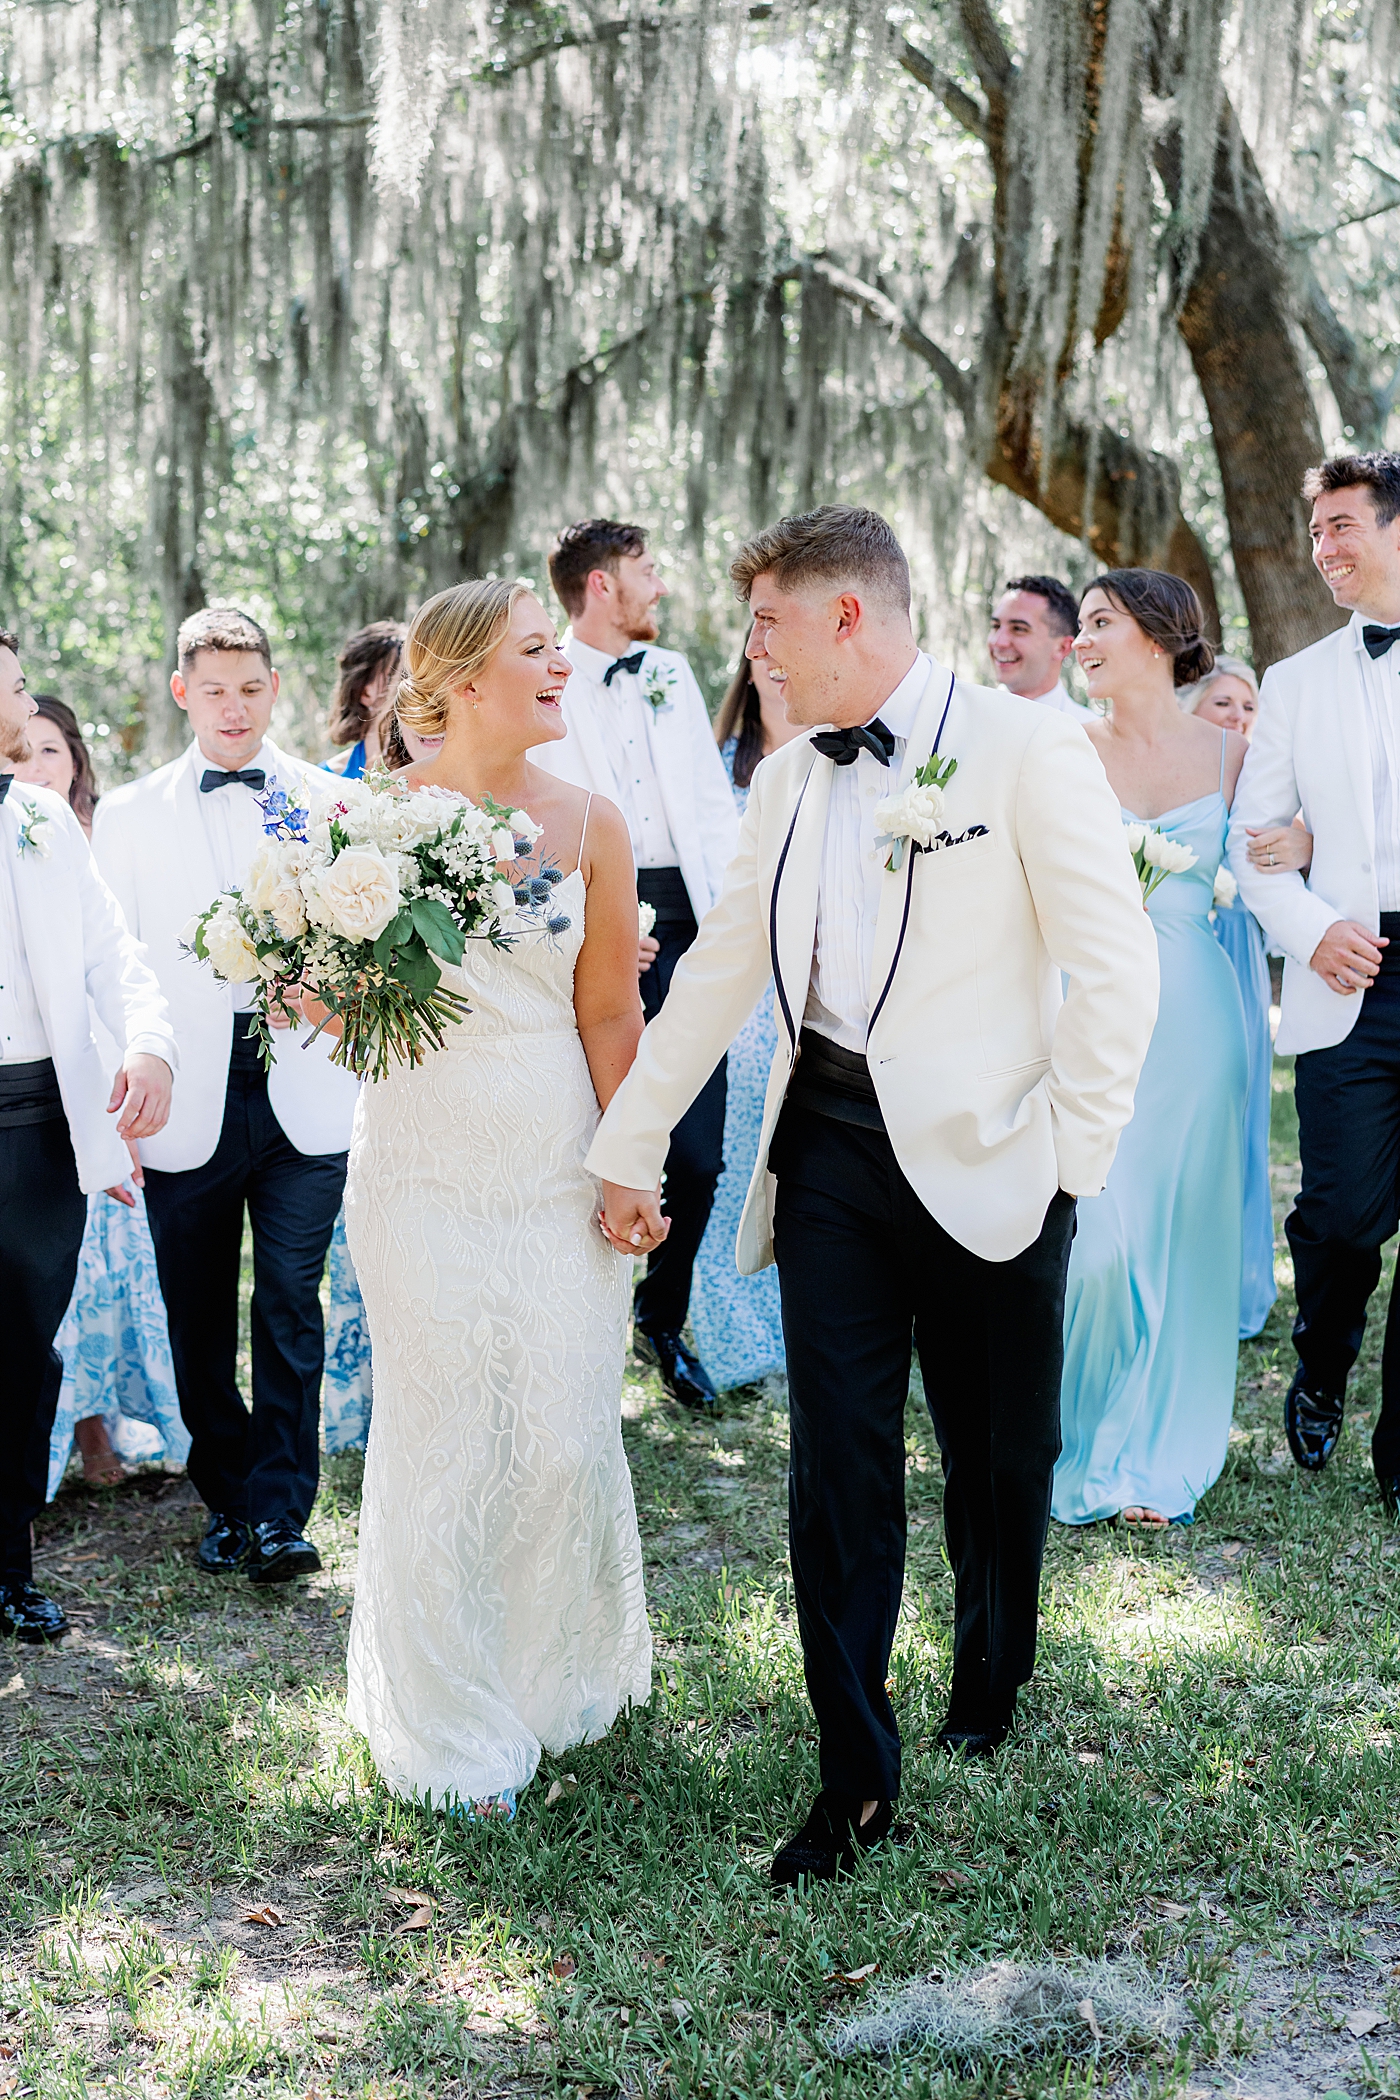 Bride and groom laughing with their wedding party | Images by Annie Laura Photography